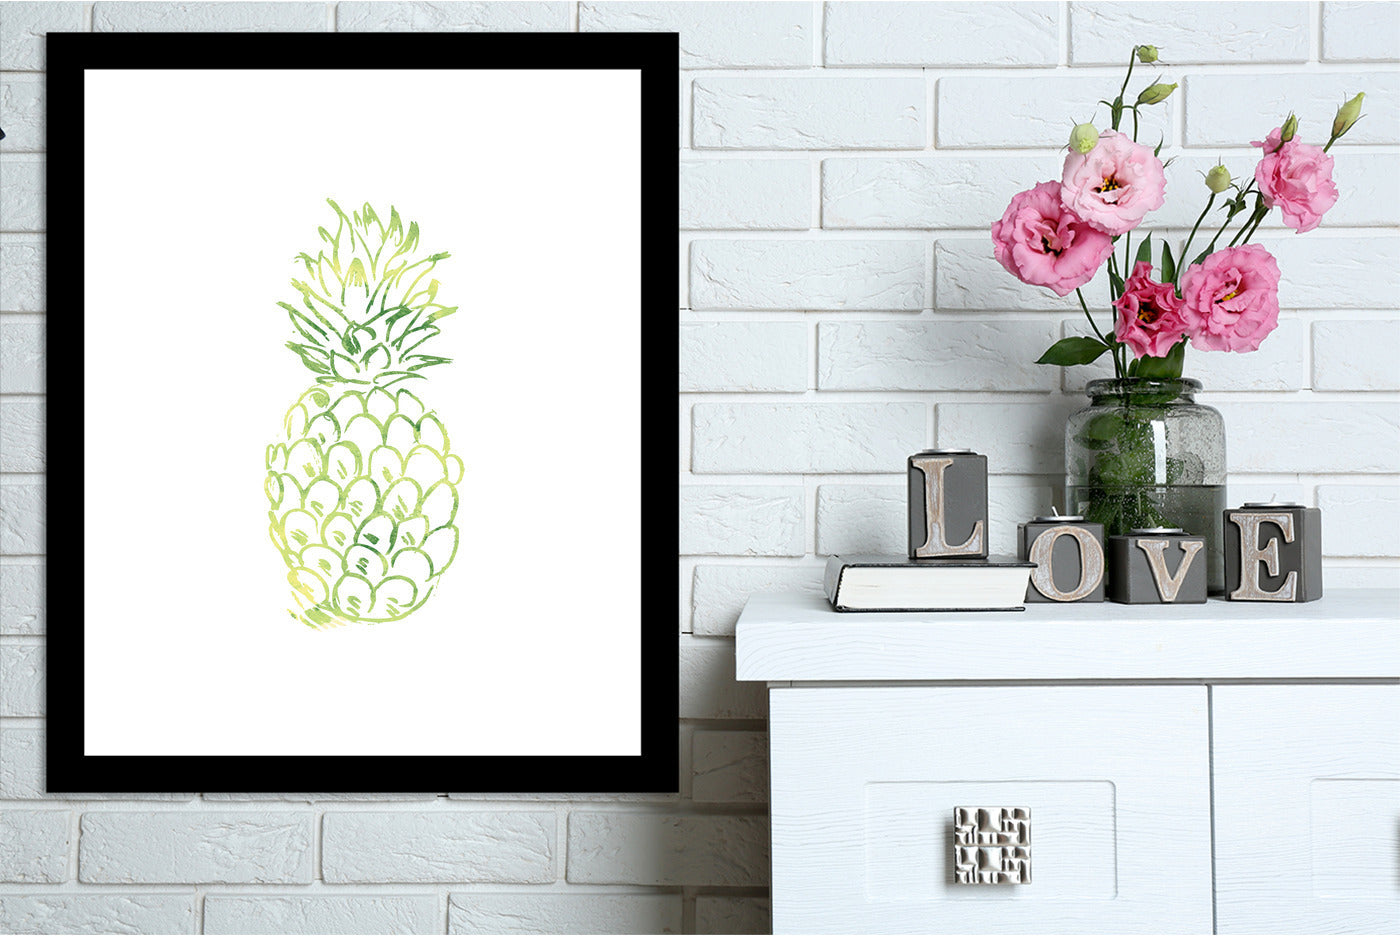 Watercolor Yellow Pineapple  by Jetty Printables Framed Print - Americanflat